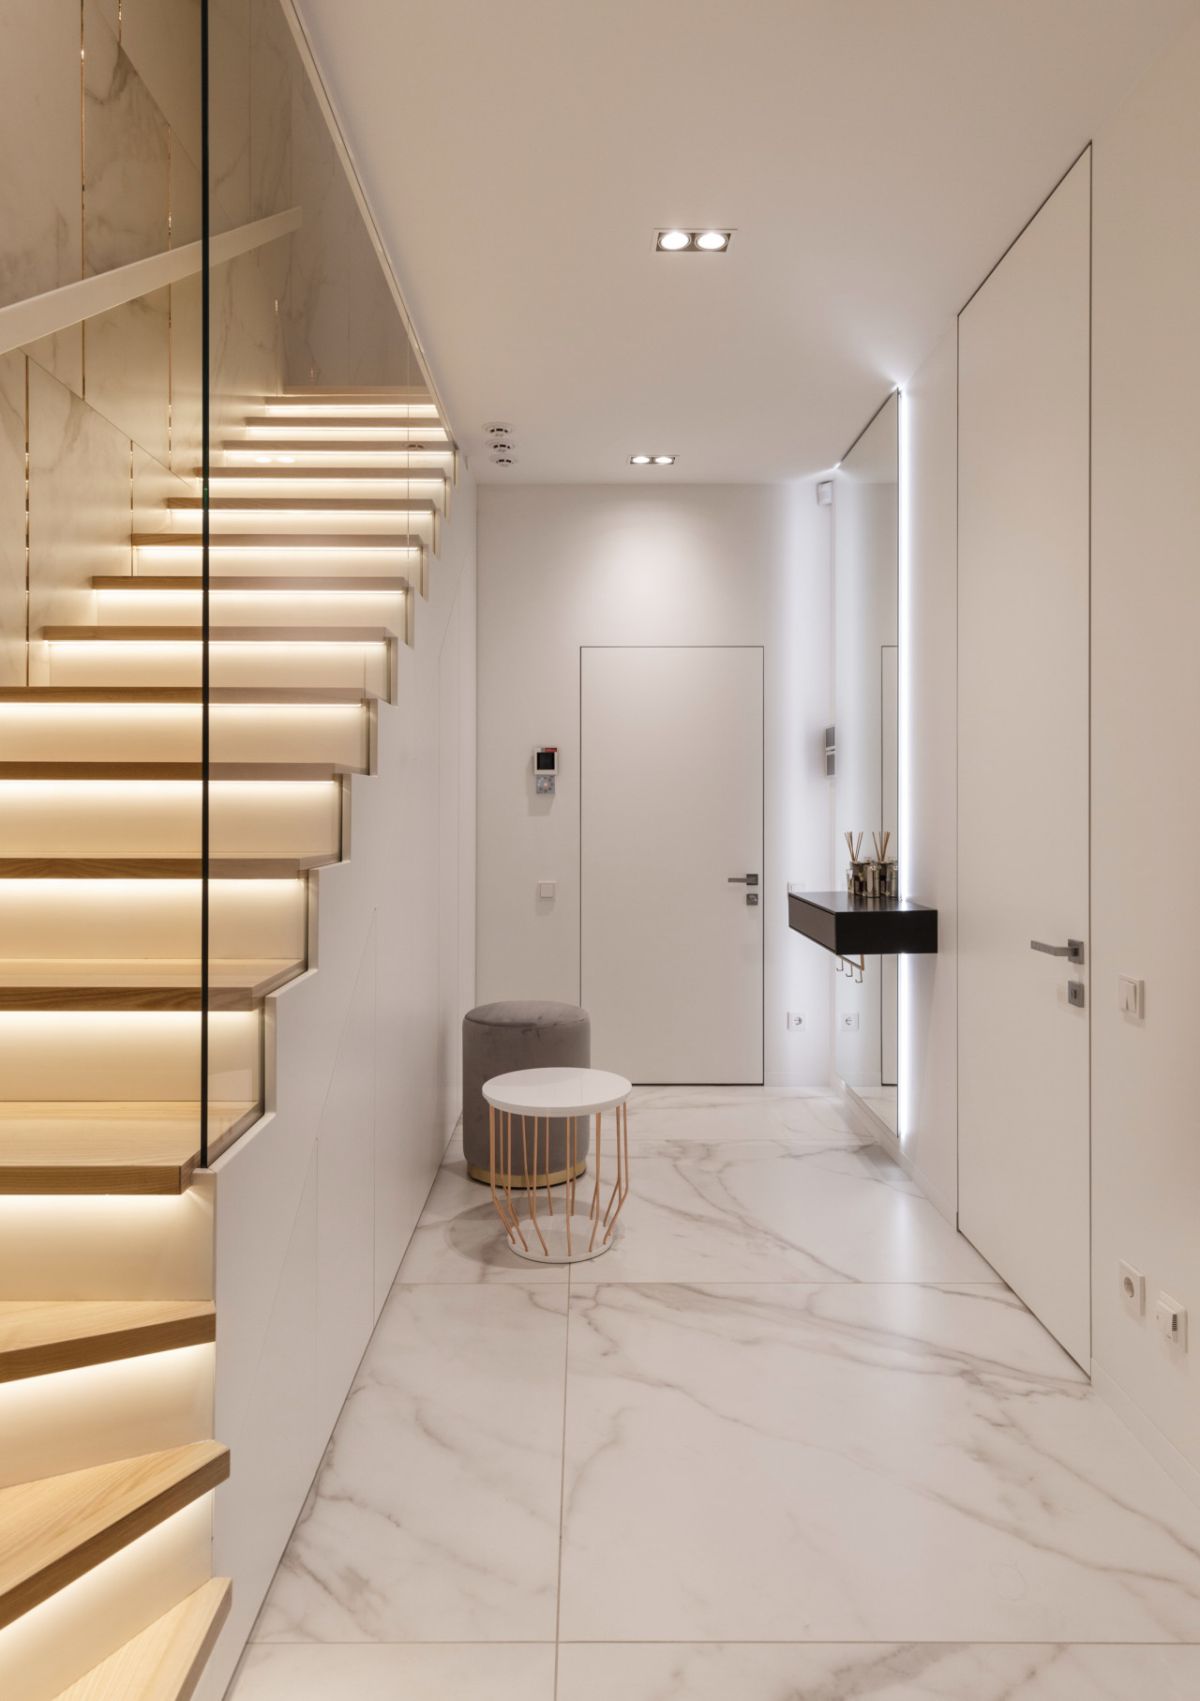 The entryway is very laconic, with white marble tiles and neutral stools and tables